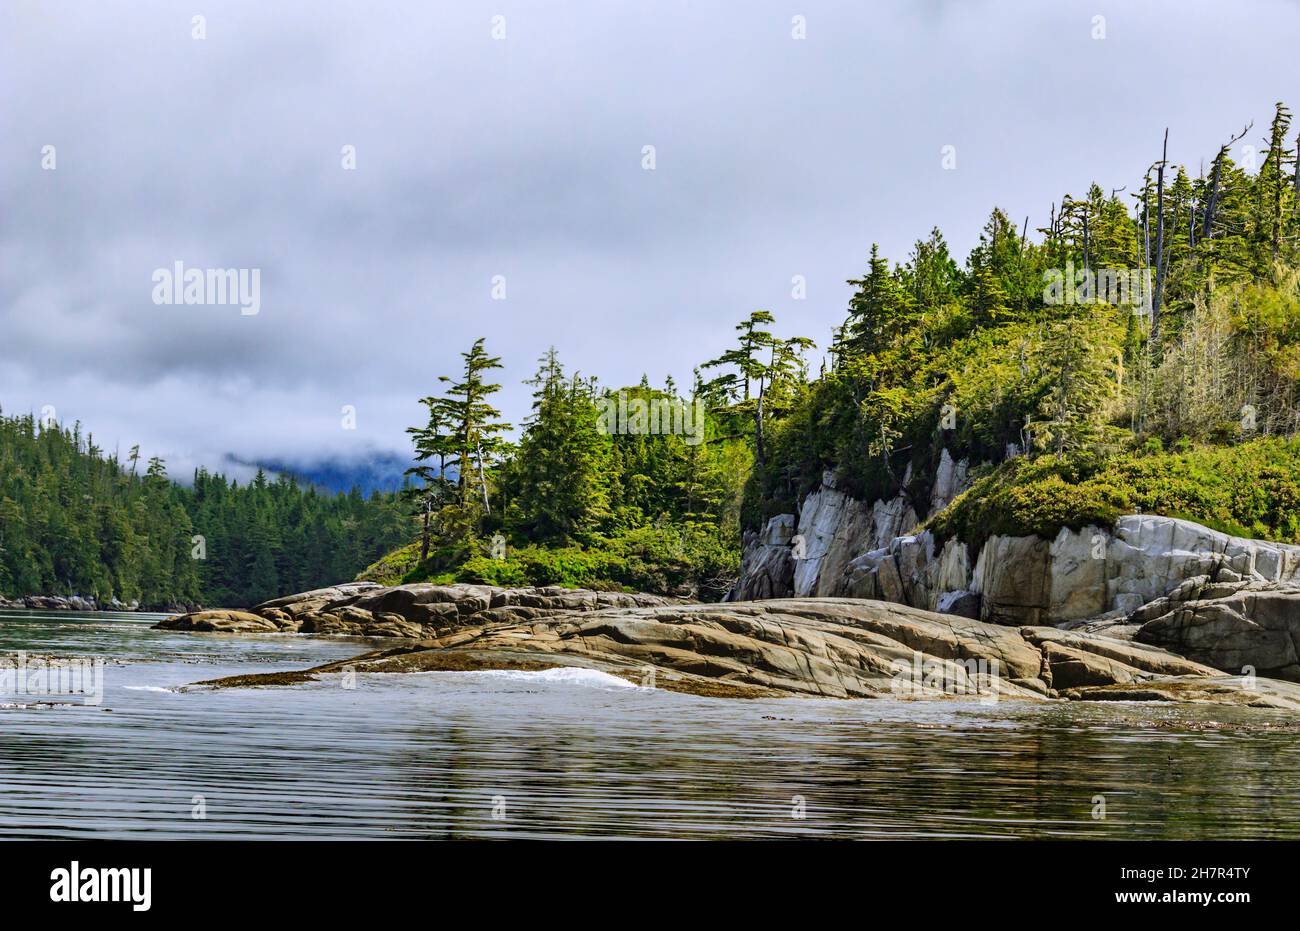 Waves wash gently onto a rocky island shore at the eastern edge of Queen Charlotte Strait, in British Columbia's coastal Great Bear Rainforest (July). Stock Photo